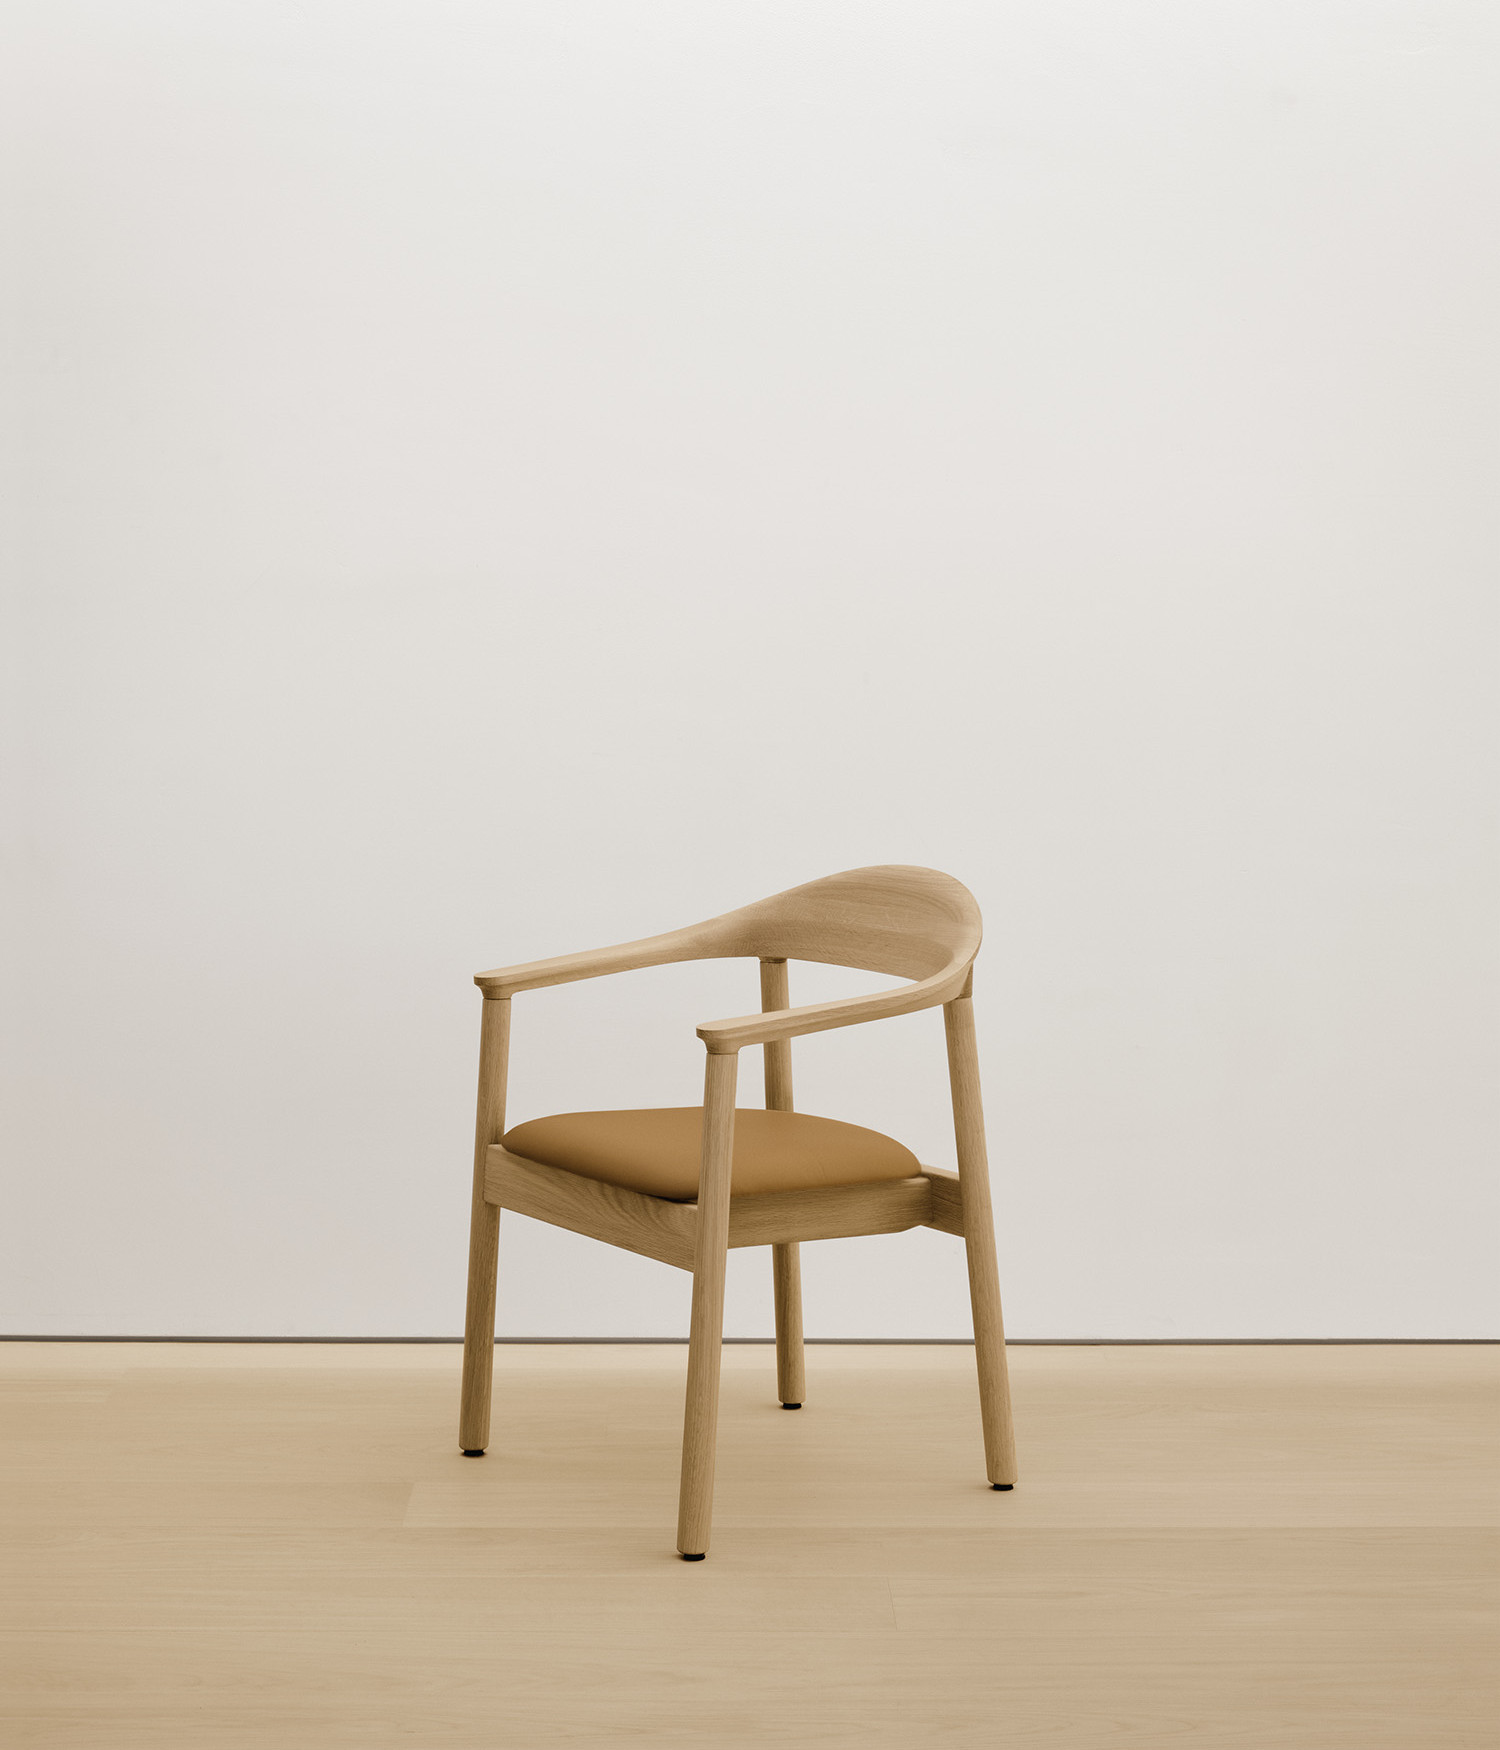 white-oak chair with tan color upholstered seat 